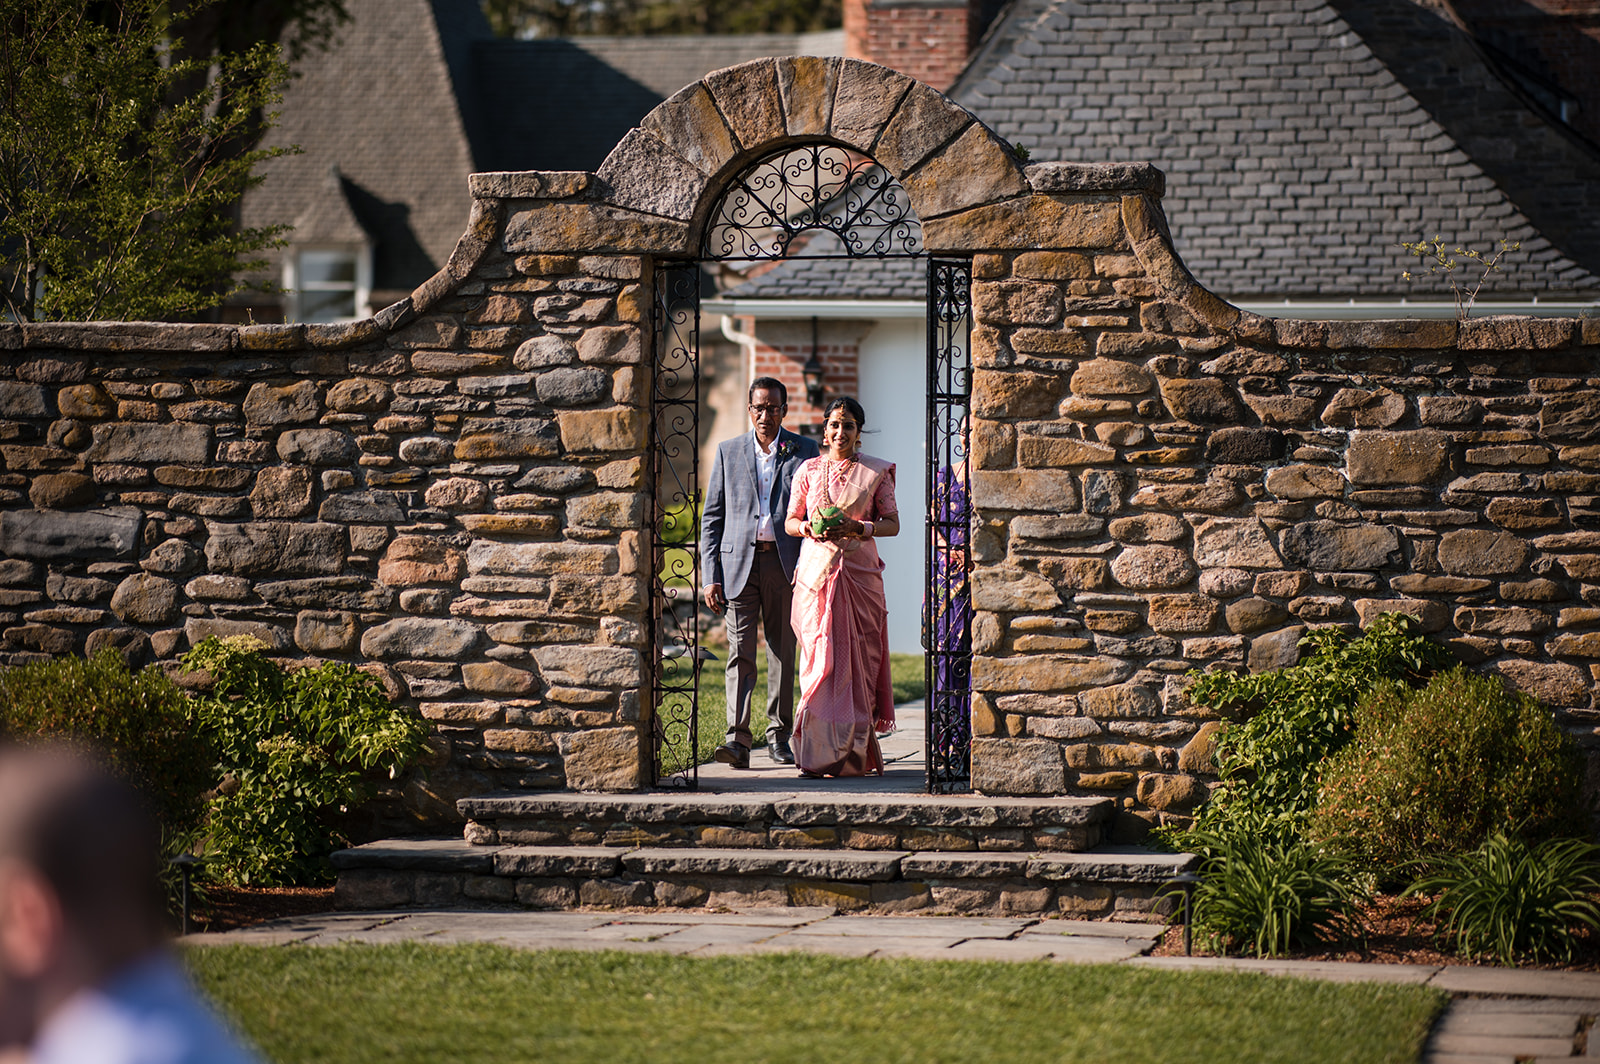 The bride and groom walking through a stone archway in a garden, the bride in a pink saree holding a bouquet, and the groom in traditional attire.